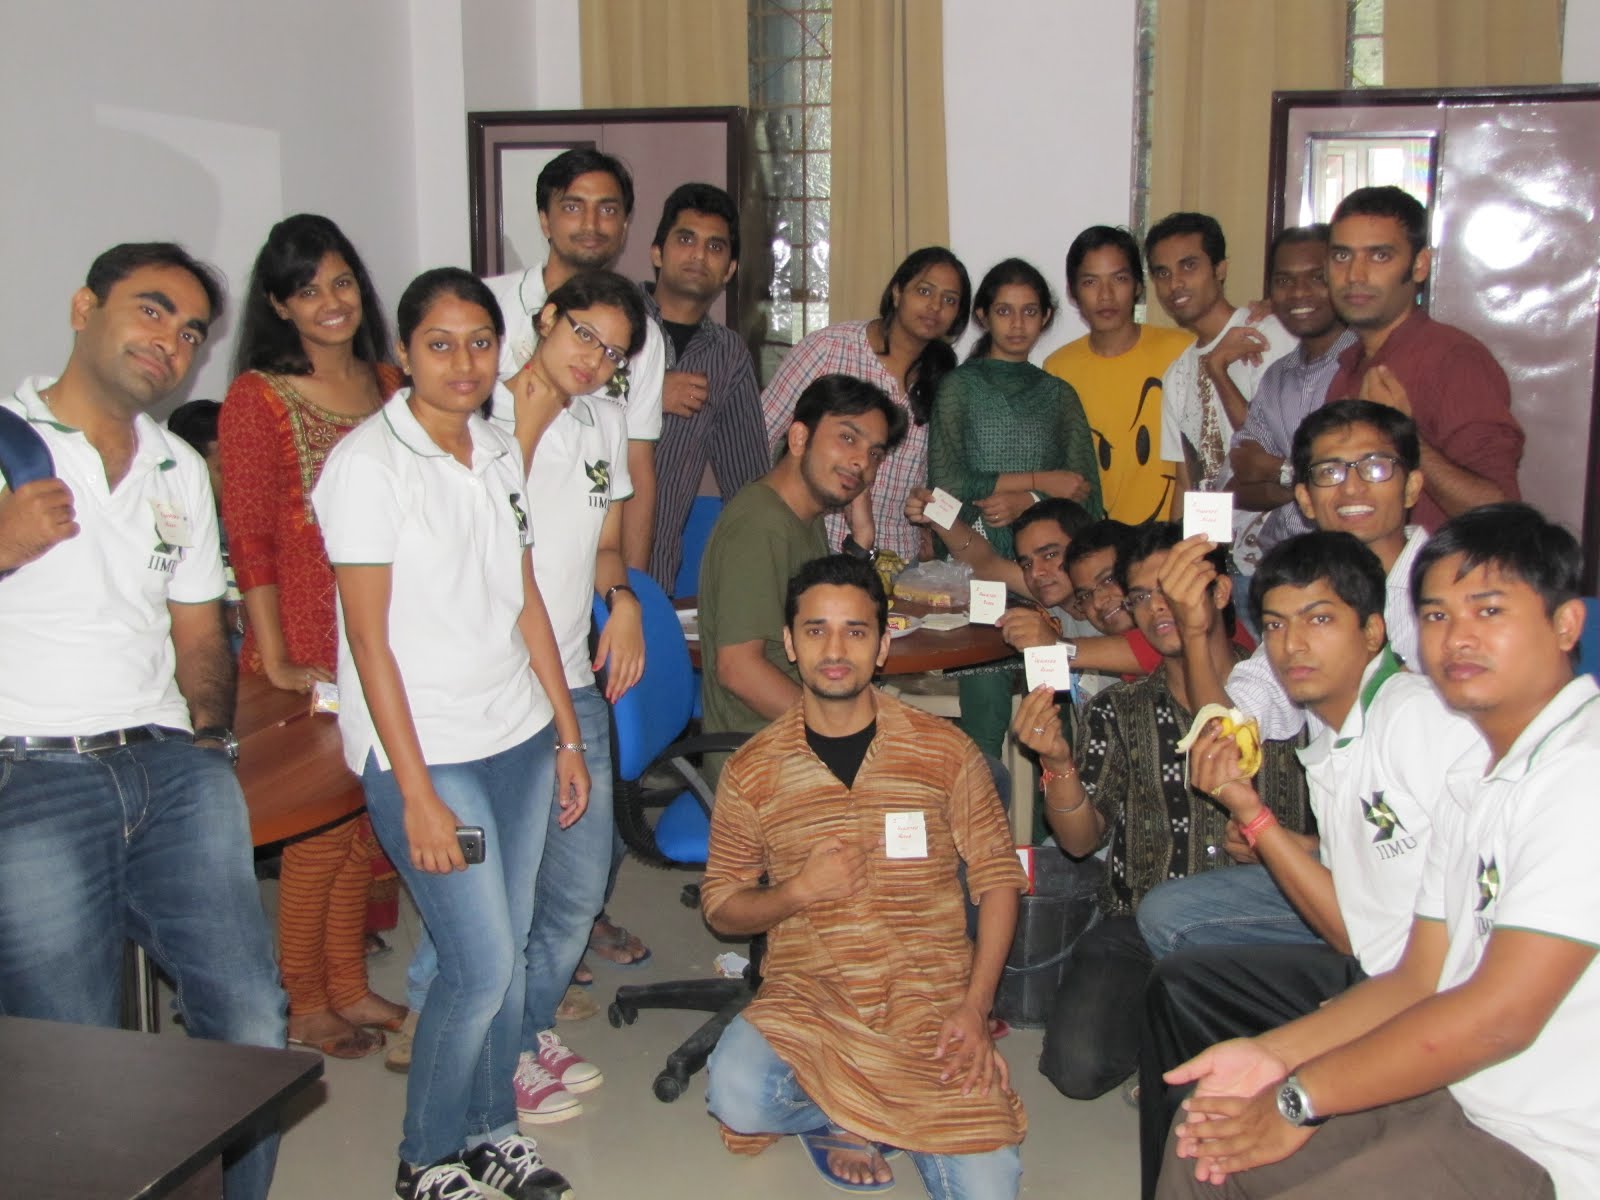 IIMU organizes Blood Donation Drive to Mark India’s 66th Independence Day